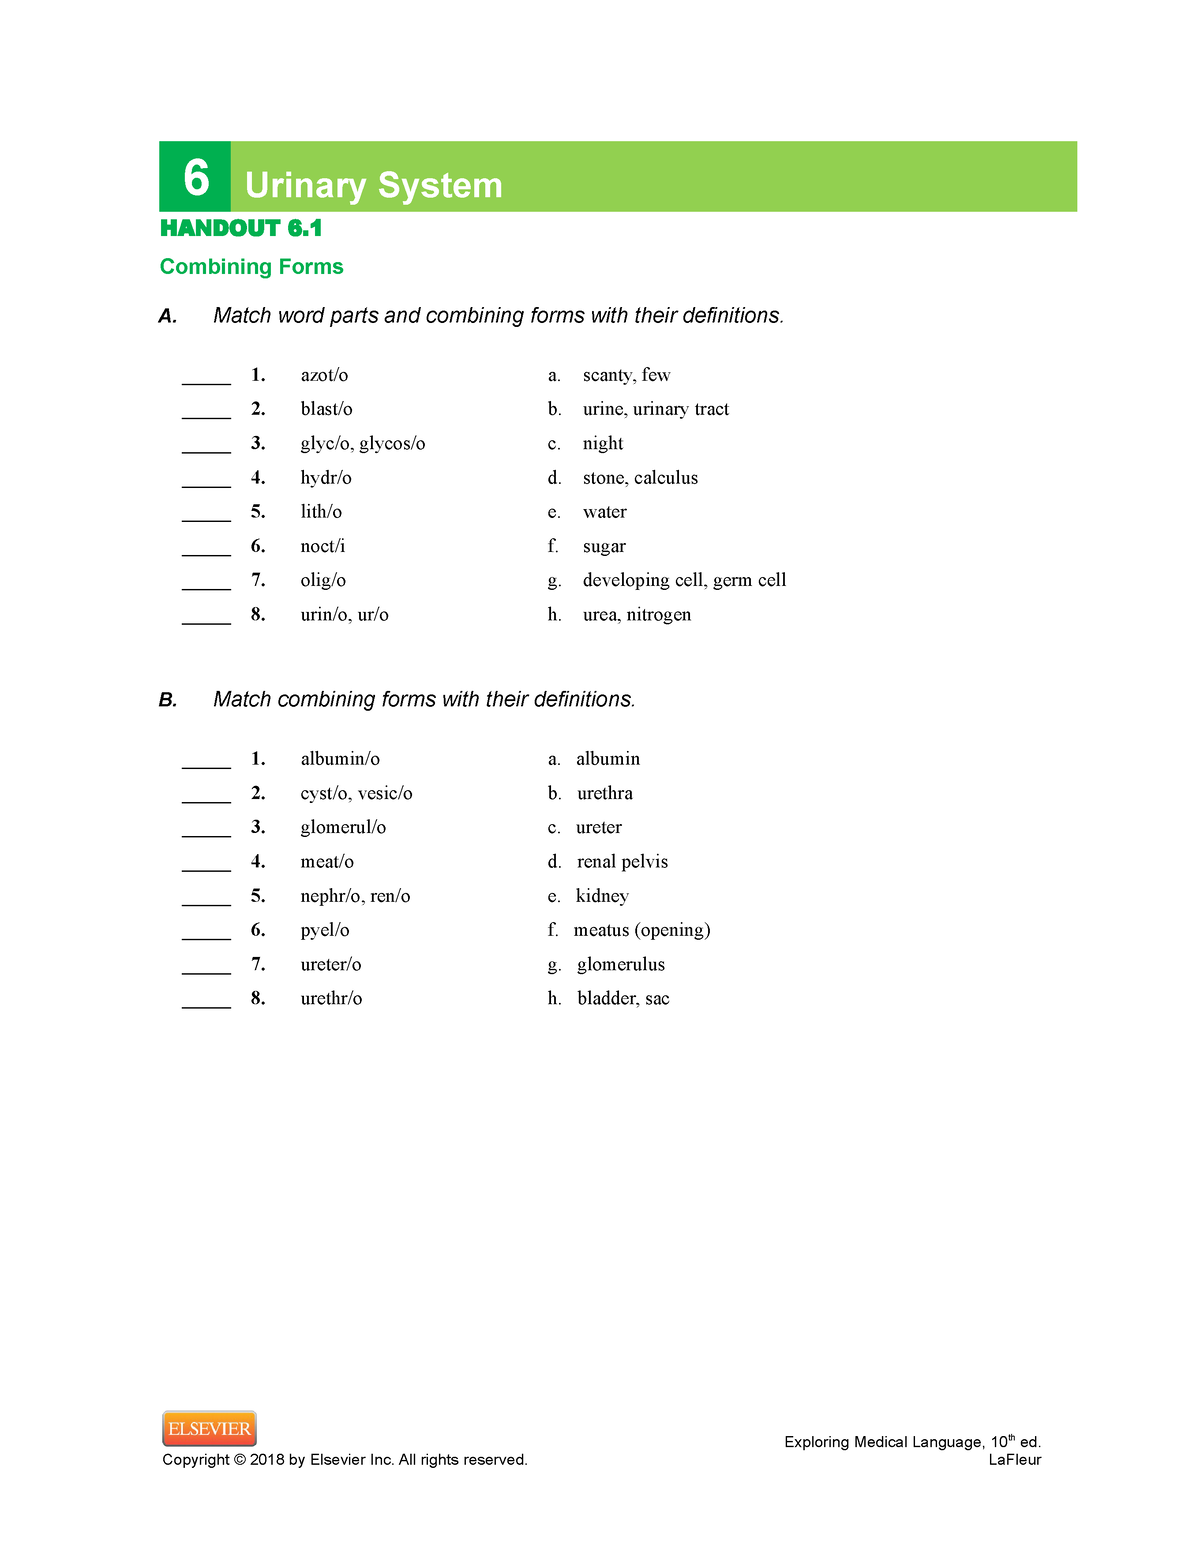 chapter-006-jbwojdb-6-urinary-system-handout-6-1-combining-forms-a